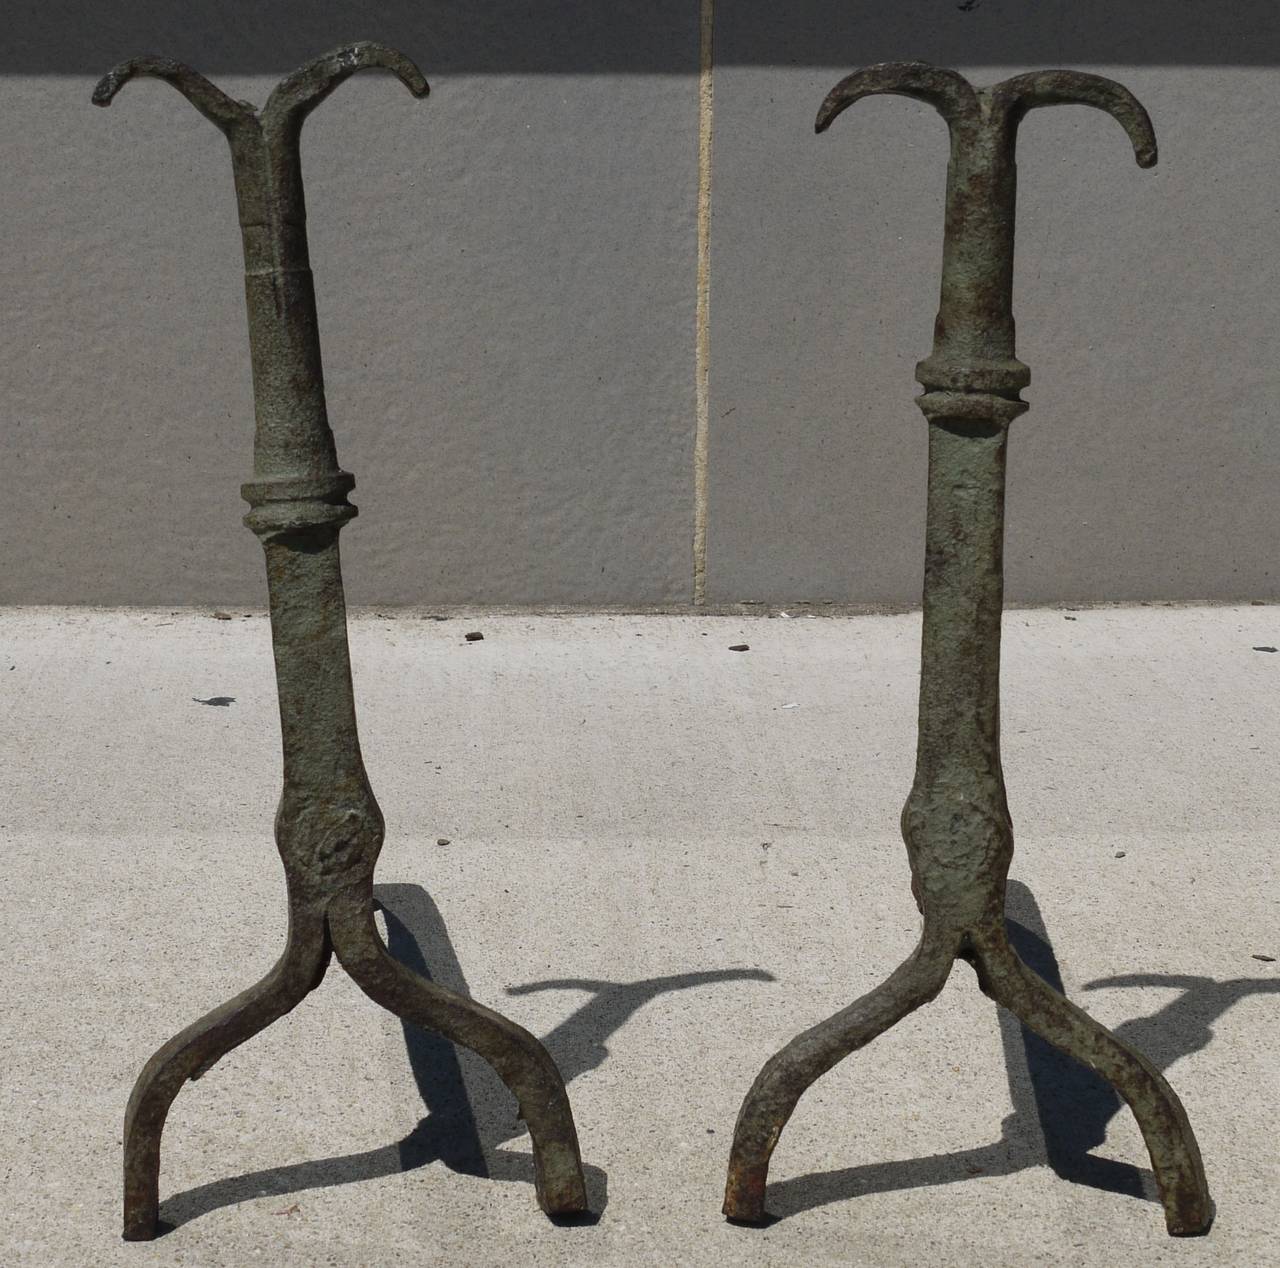 Stunning Folk Art andirons with very Giacometti lines but pre-Giacometti. I believe these are American and from Shanendoah Valley region of Virginia. One is signed with an E stamp on back. Remanents of old green paint give them a verdigris look,